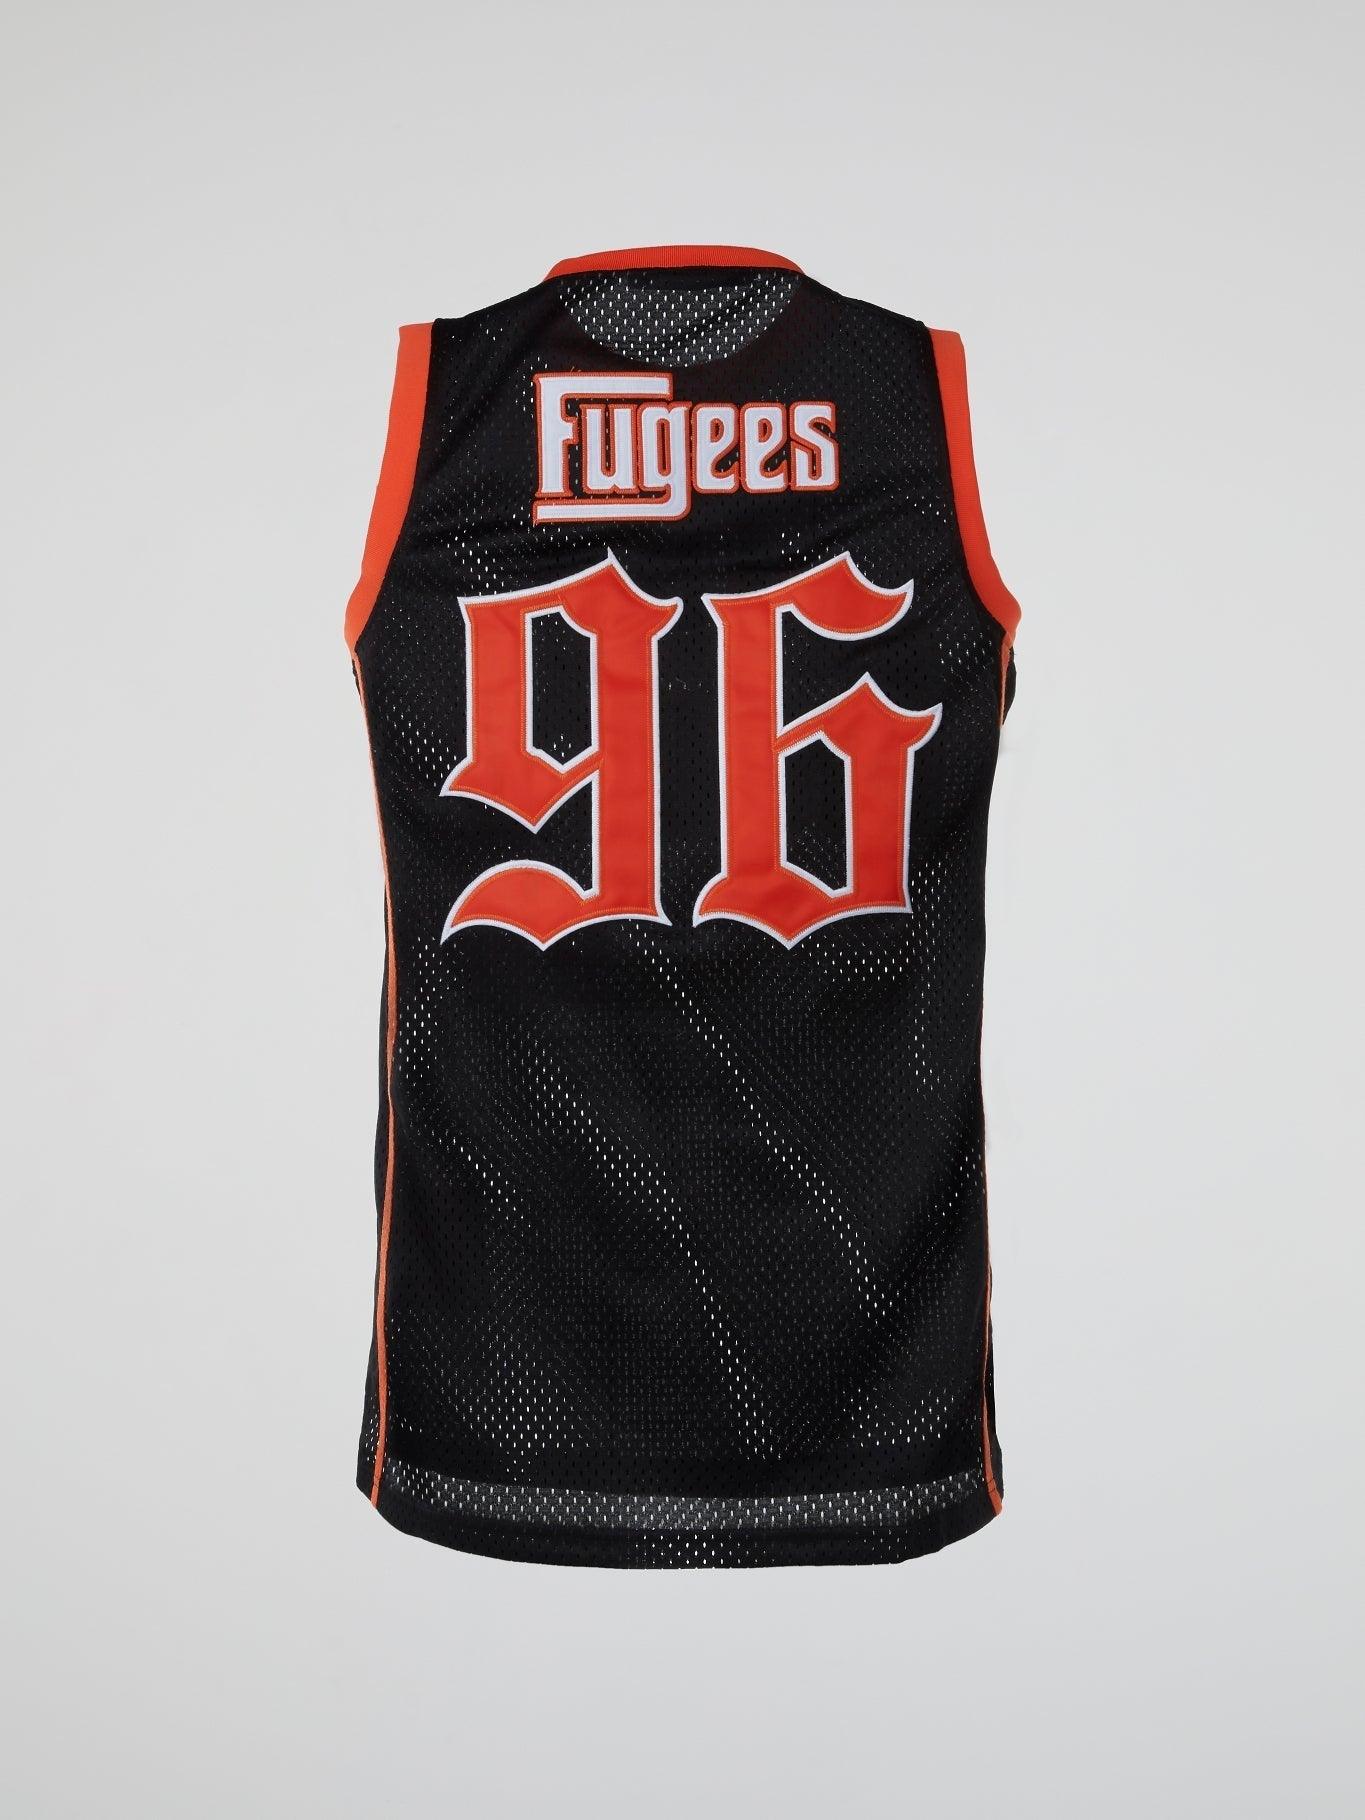 The Fugees The Score Basketball Jersey - B-Hype Society